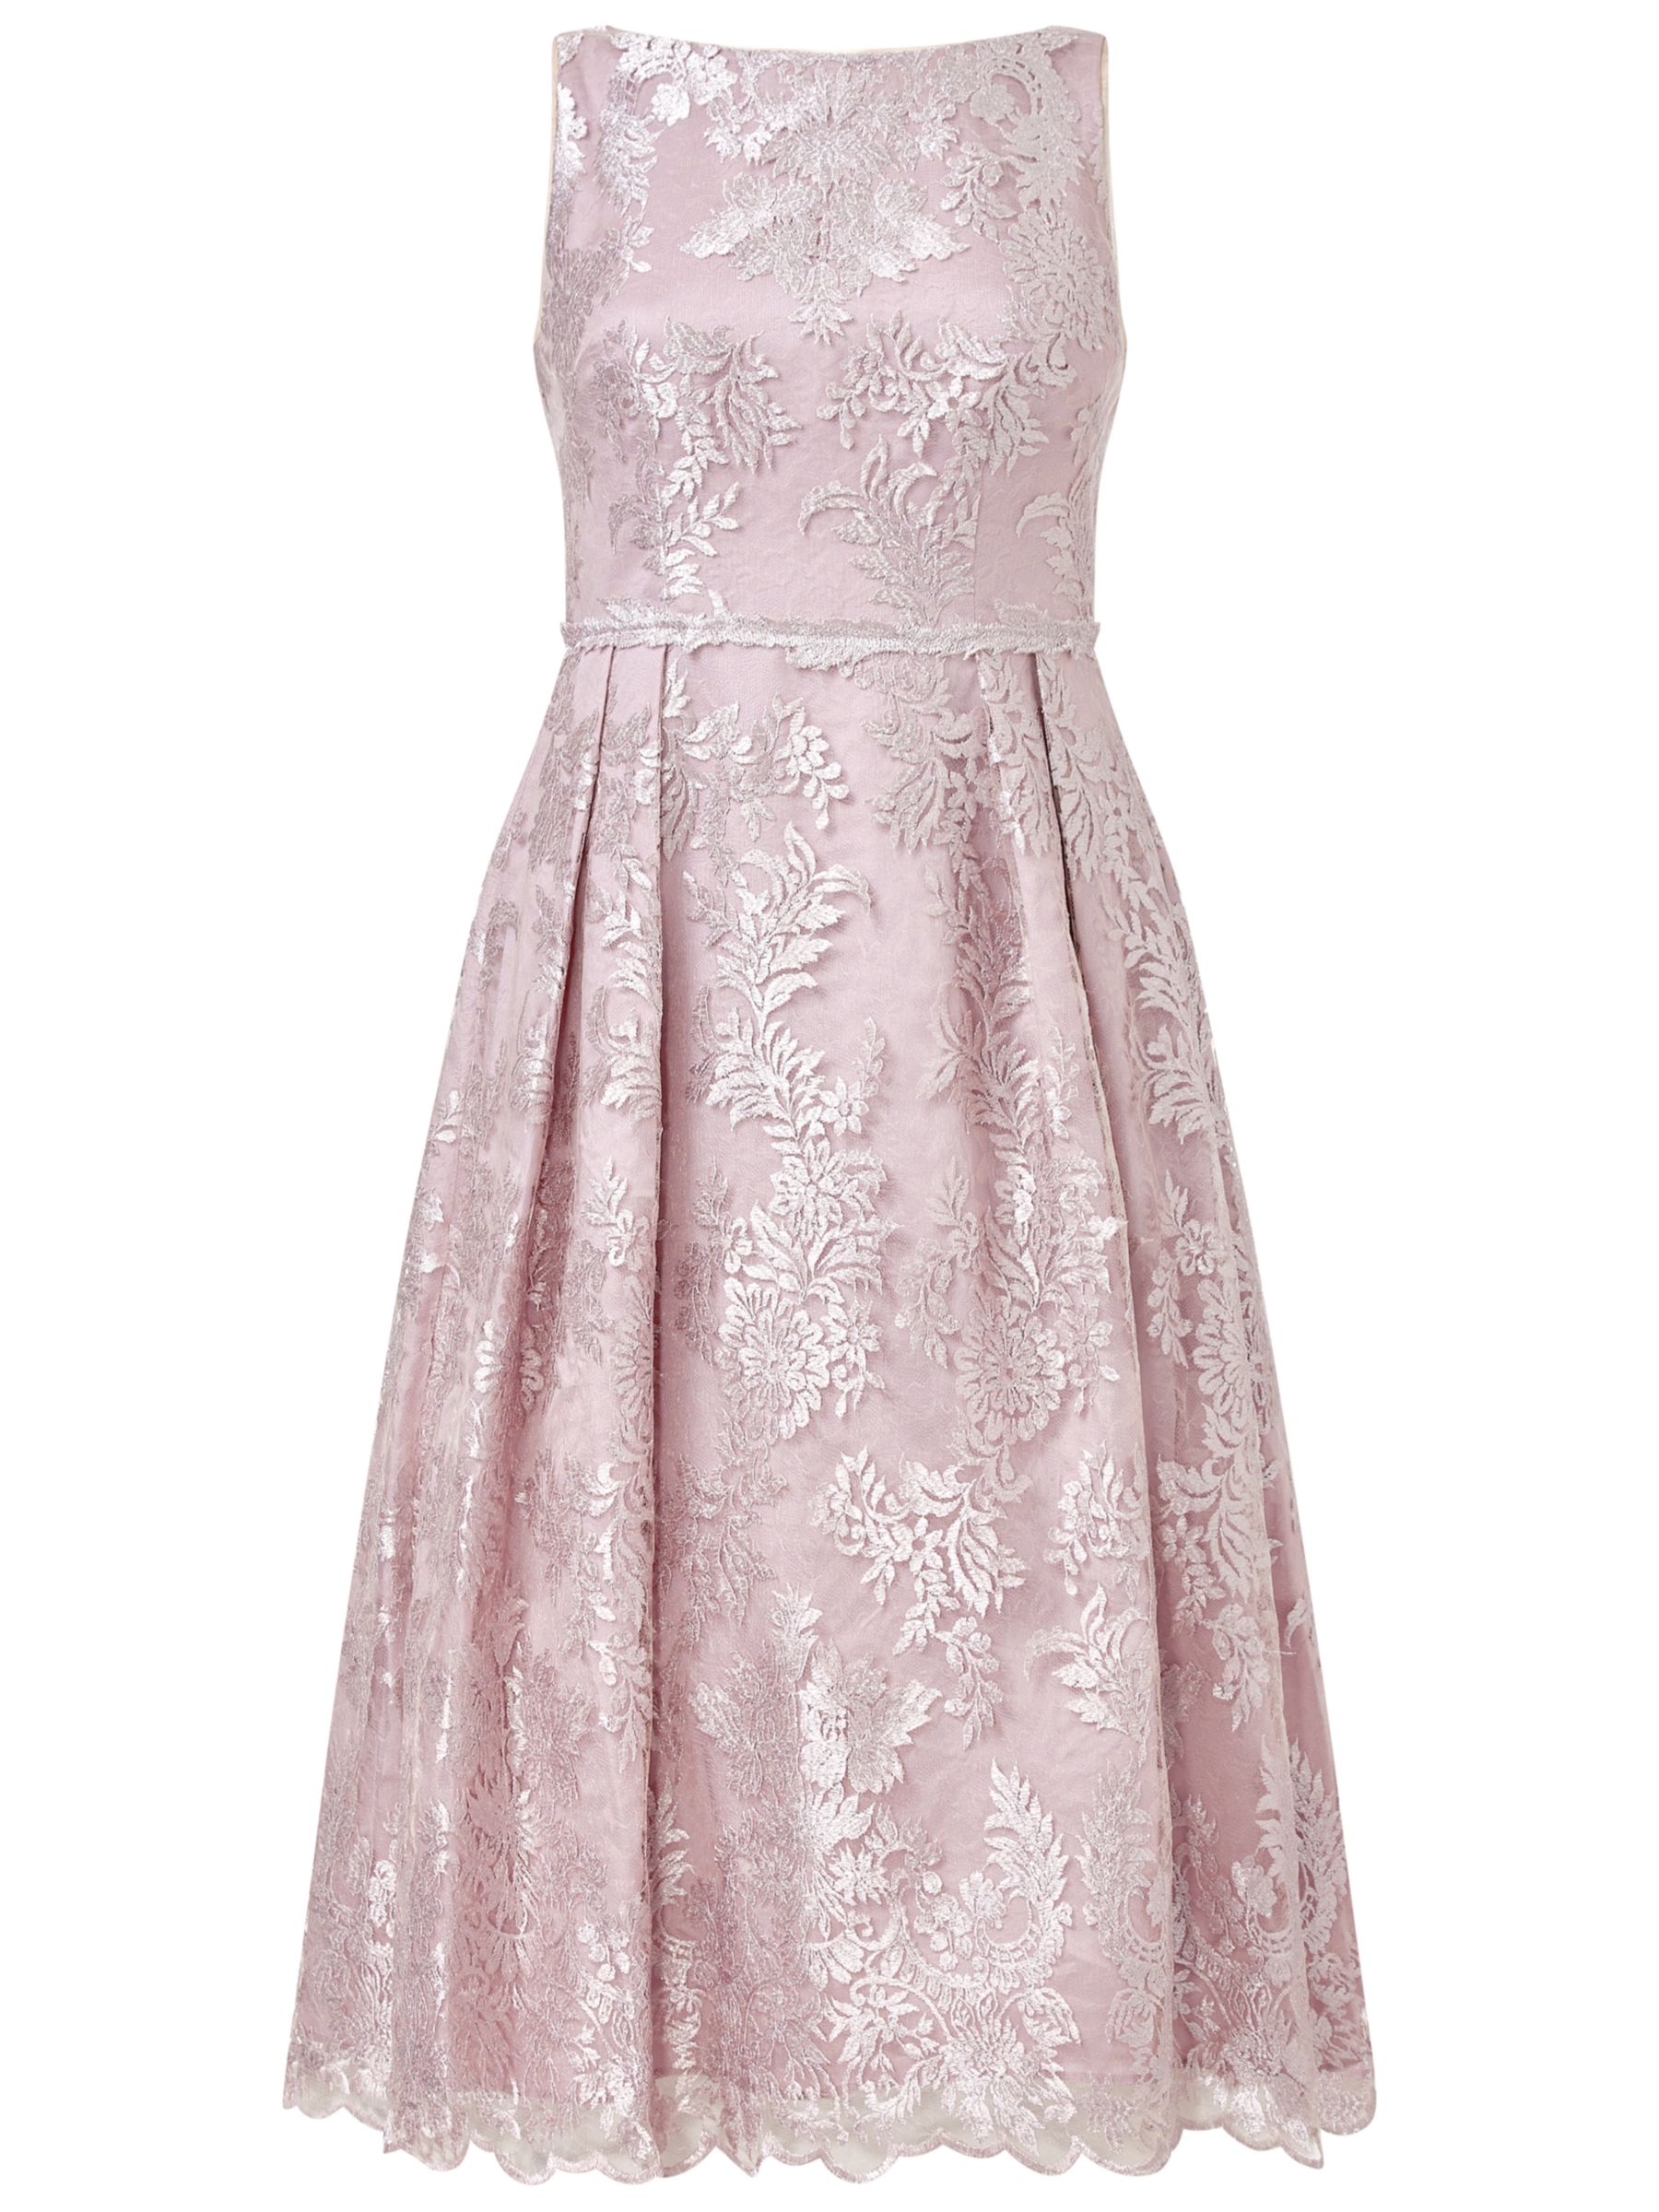 Adrianna Papell Embroidered Tea Dress, Lily Rose